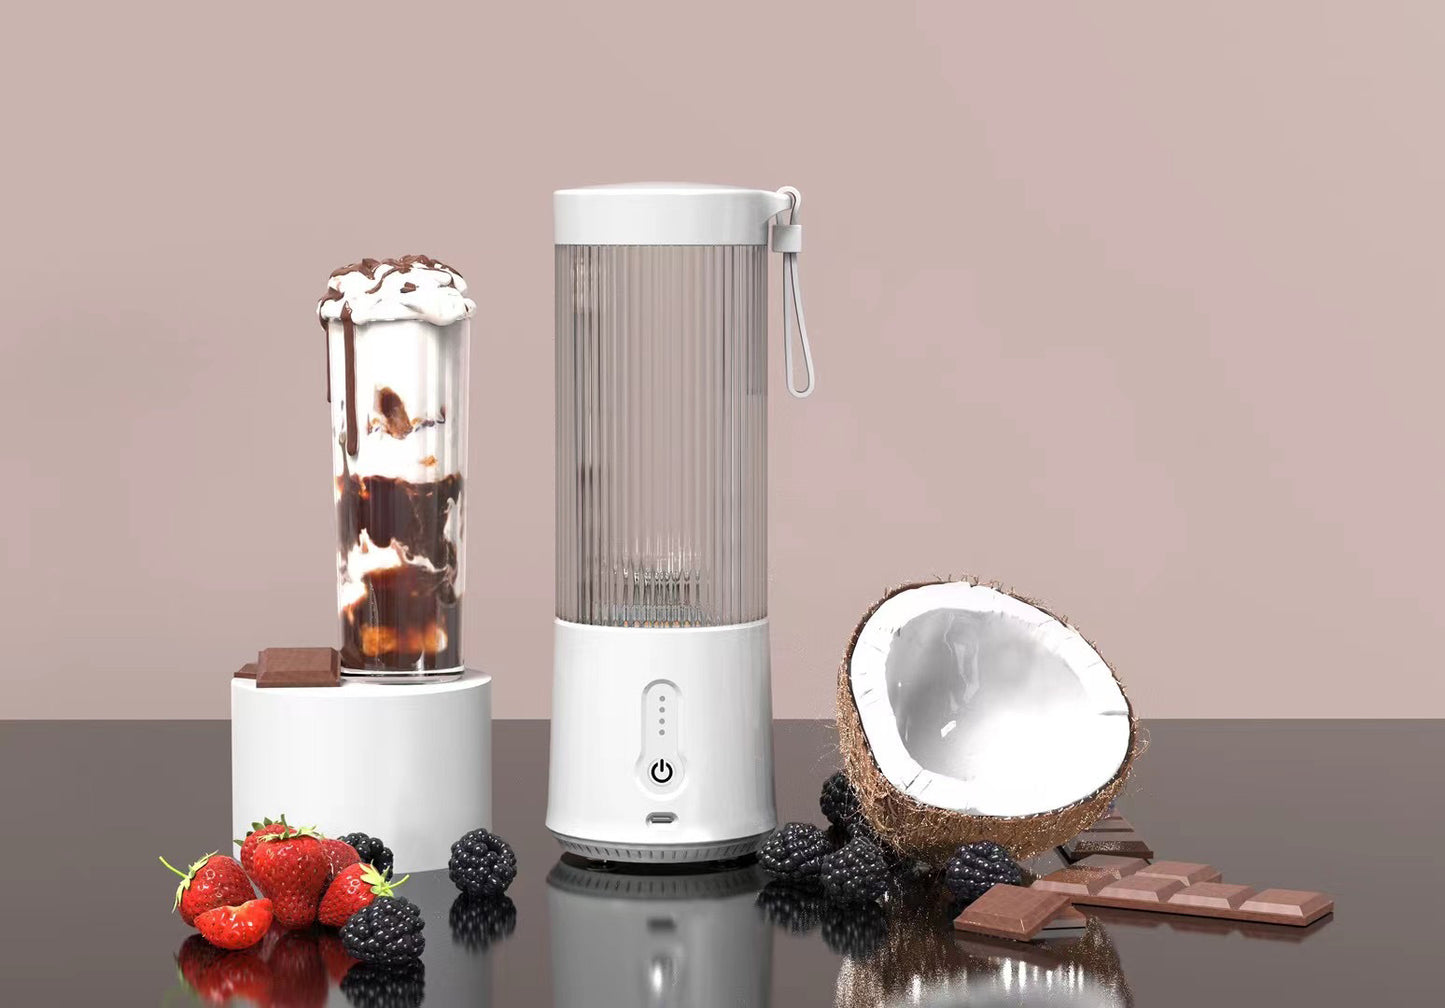 Small Juicing Cup Mini Fruit Juicer Electric Blender